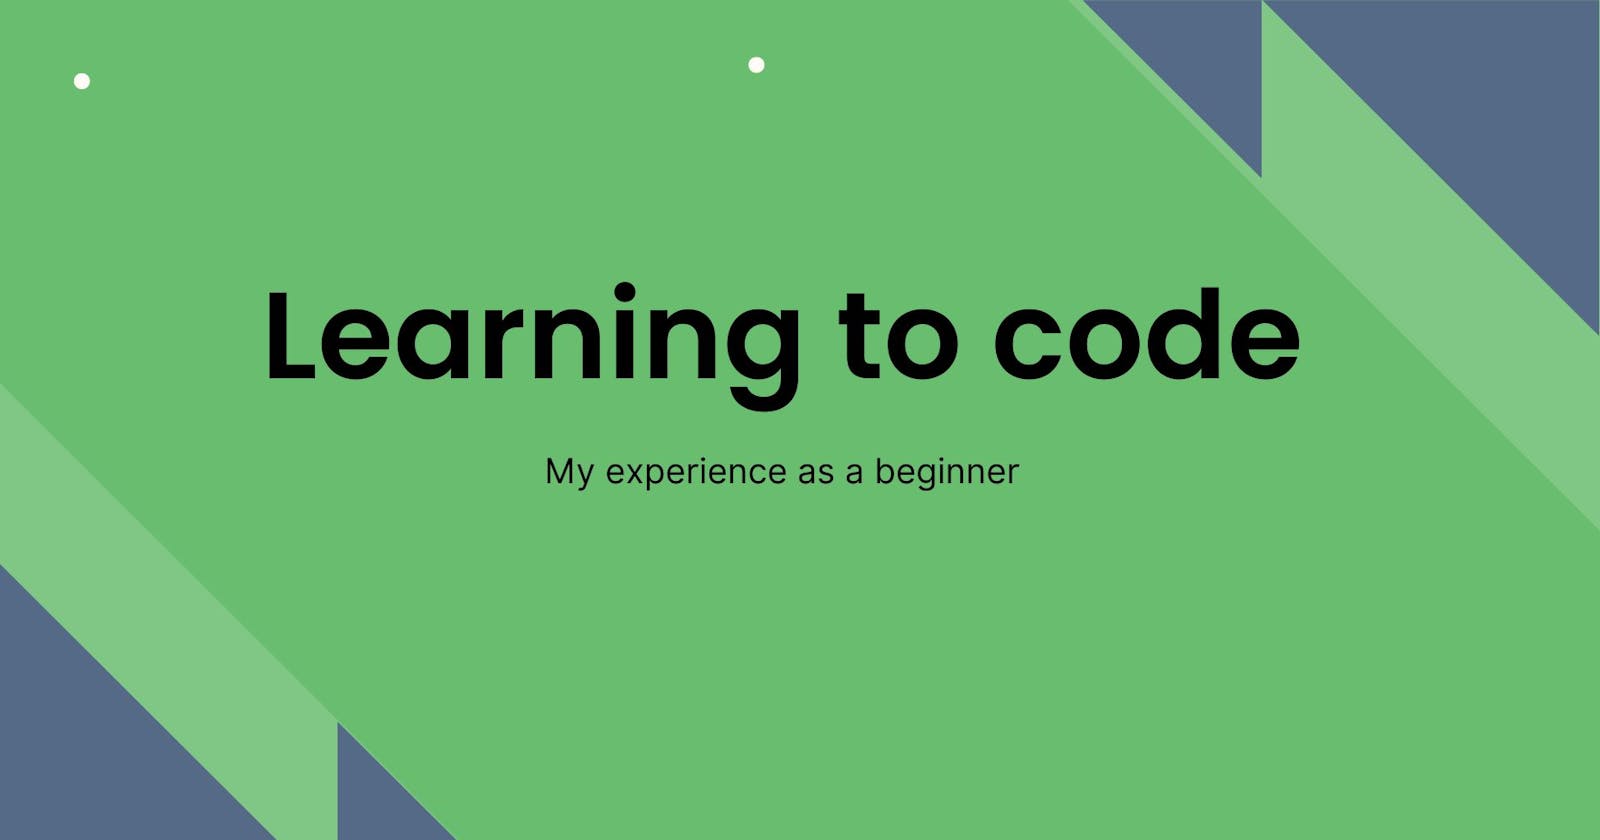 Learning to code (my experience)